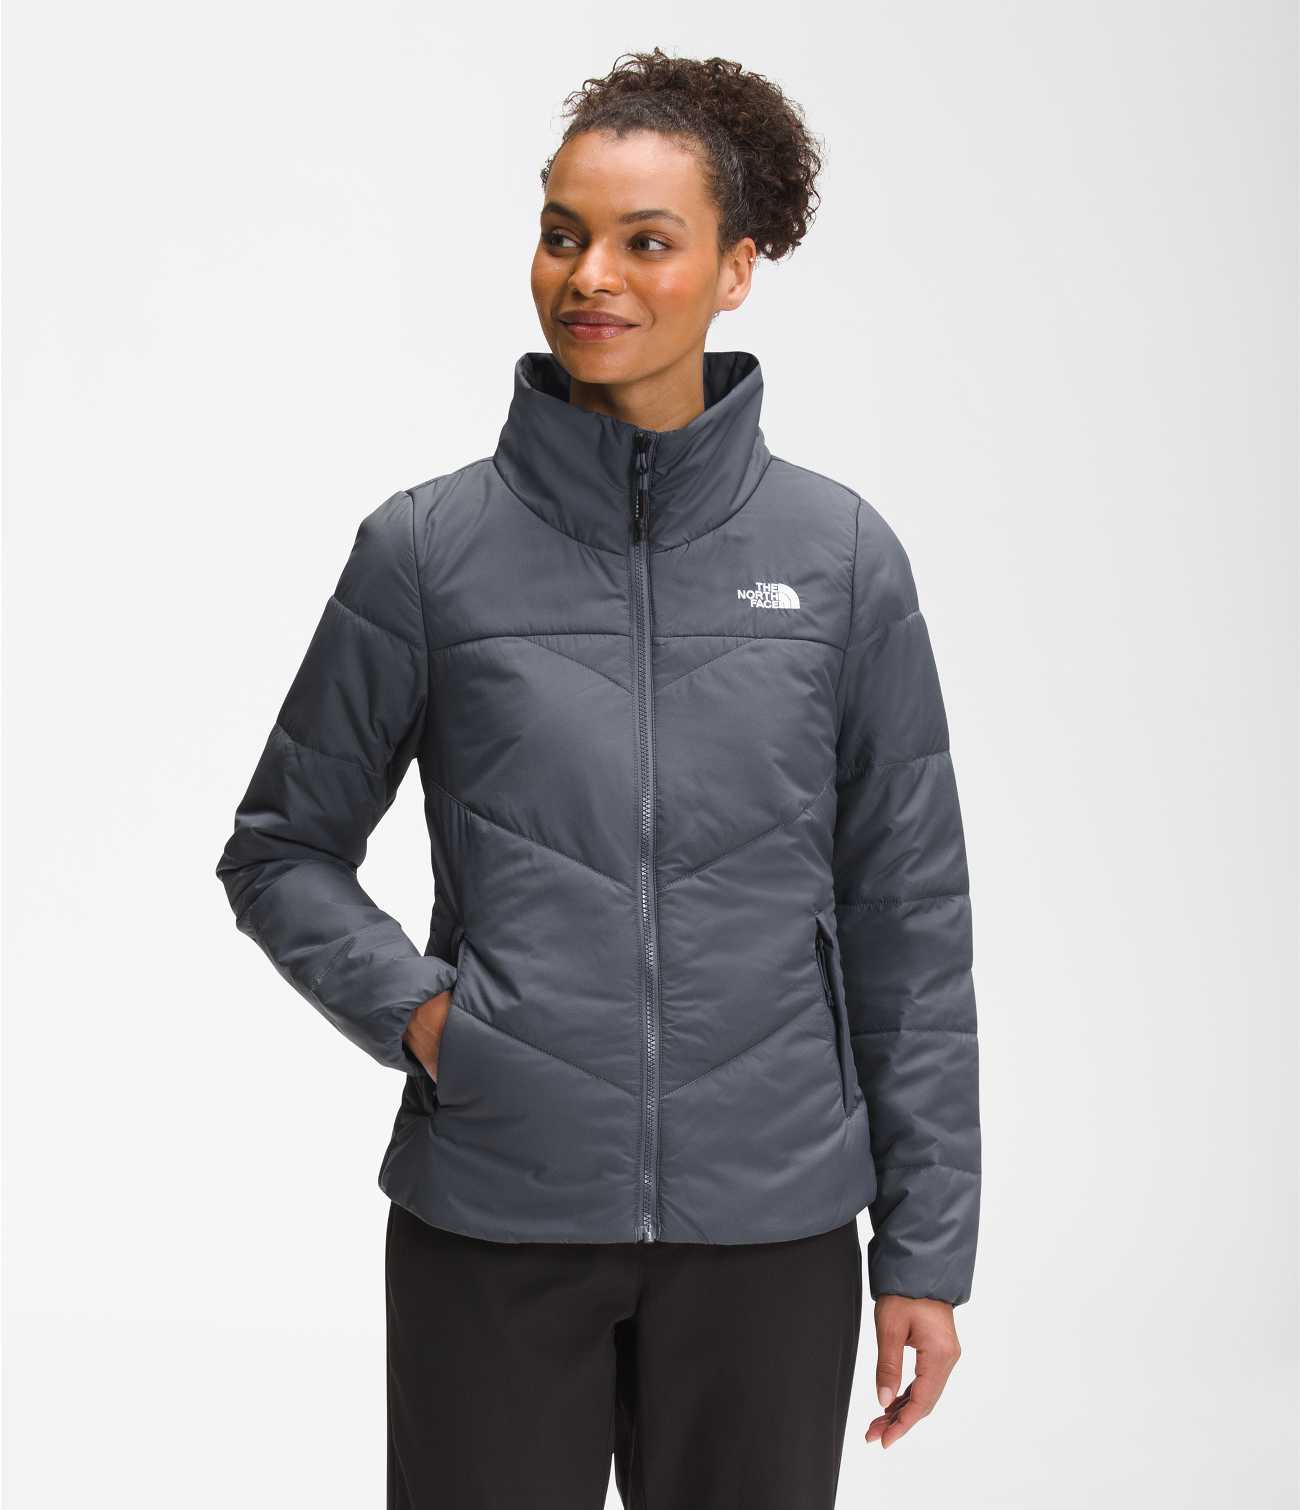 W EXPLORE FARTHER JACKET | The North Face | The North Face Renewed